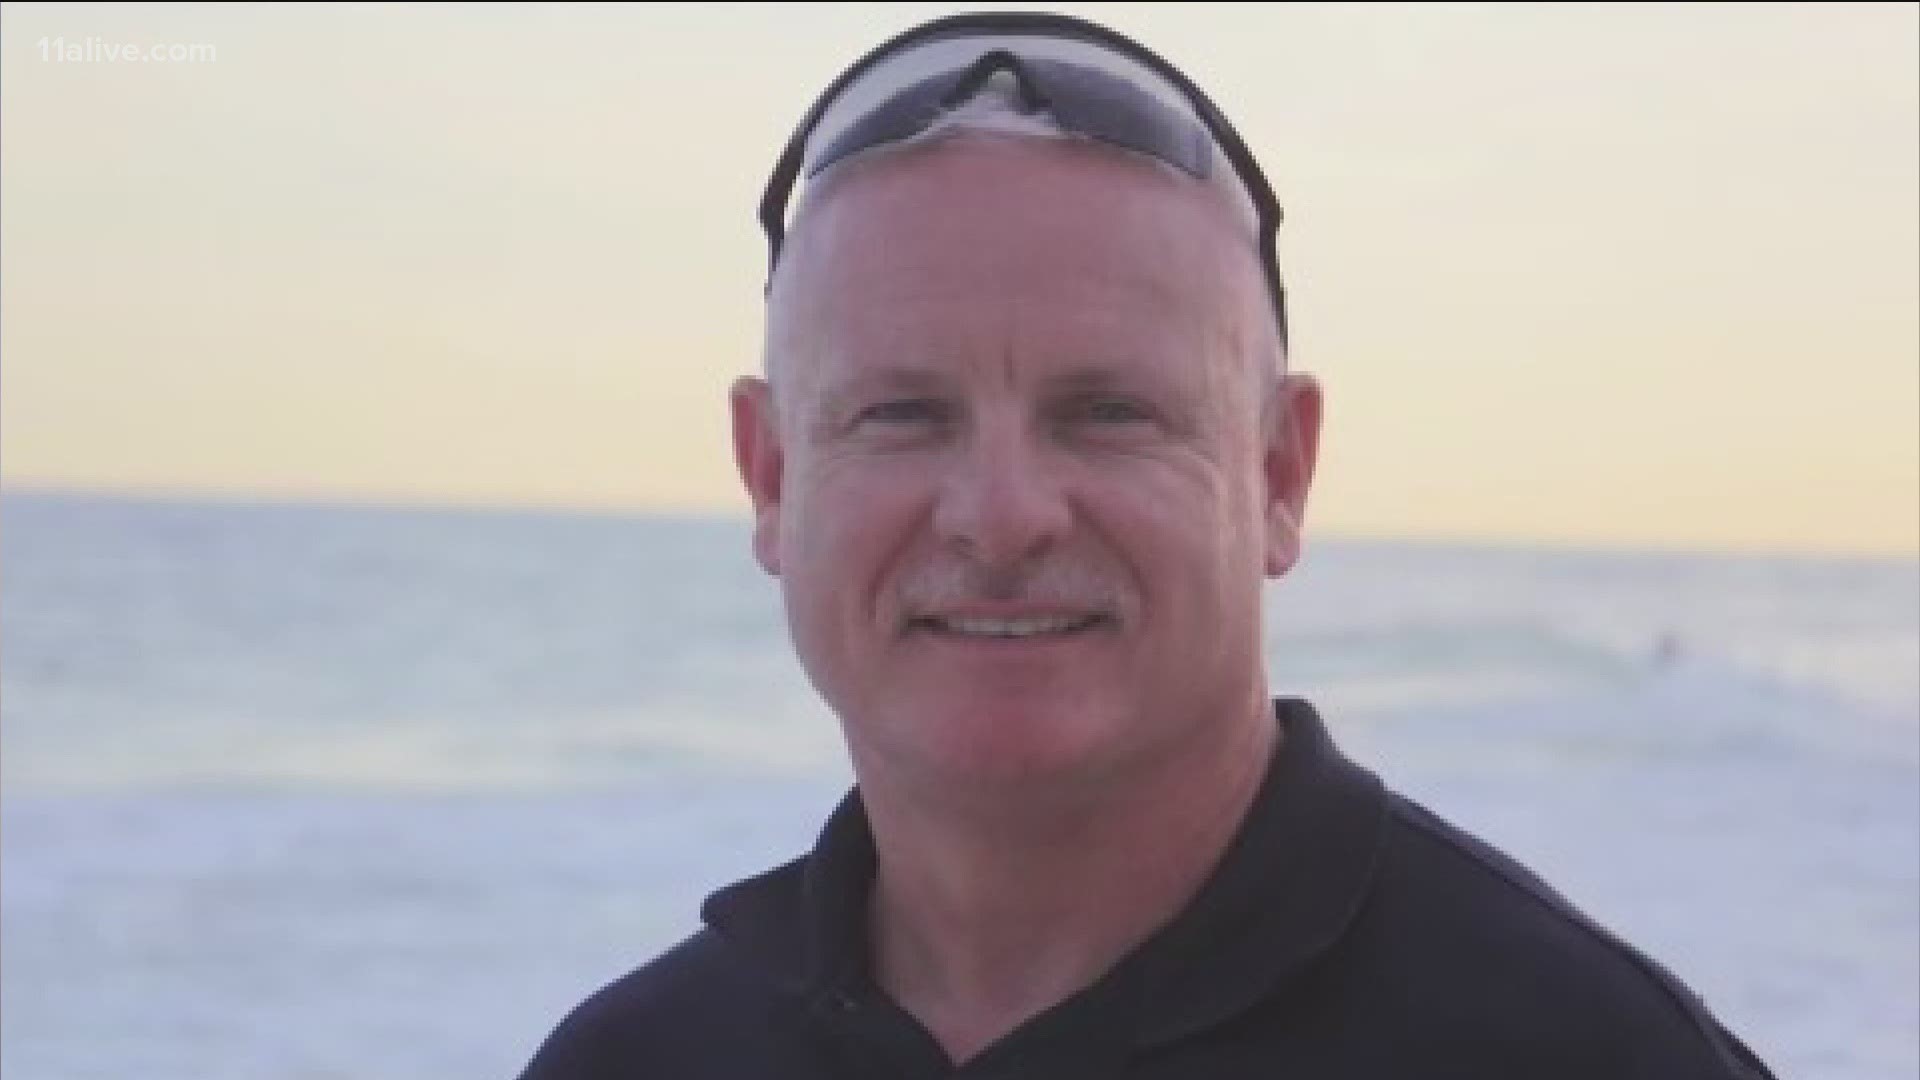 Emergency responders in two states are mourning the loss of a man who dedicated his life to helping others to the very last.